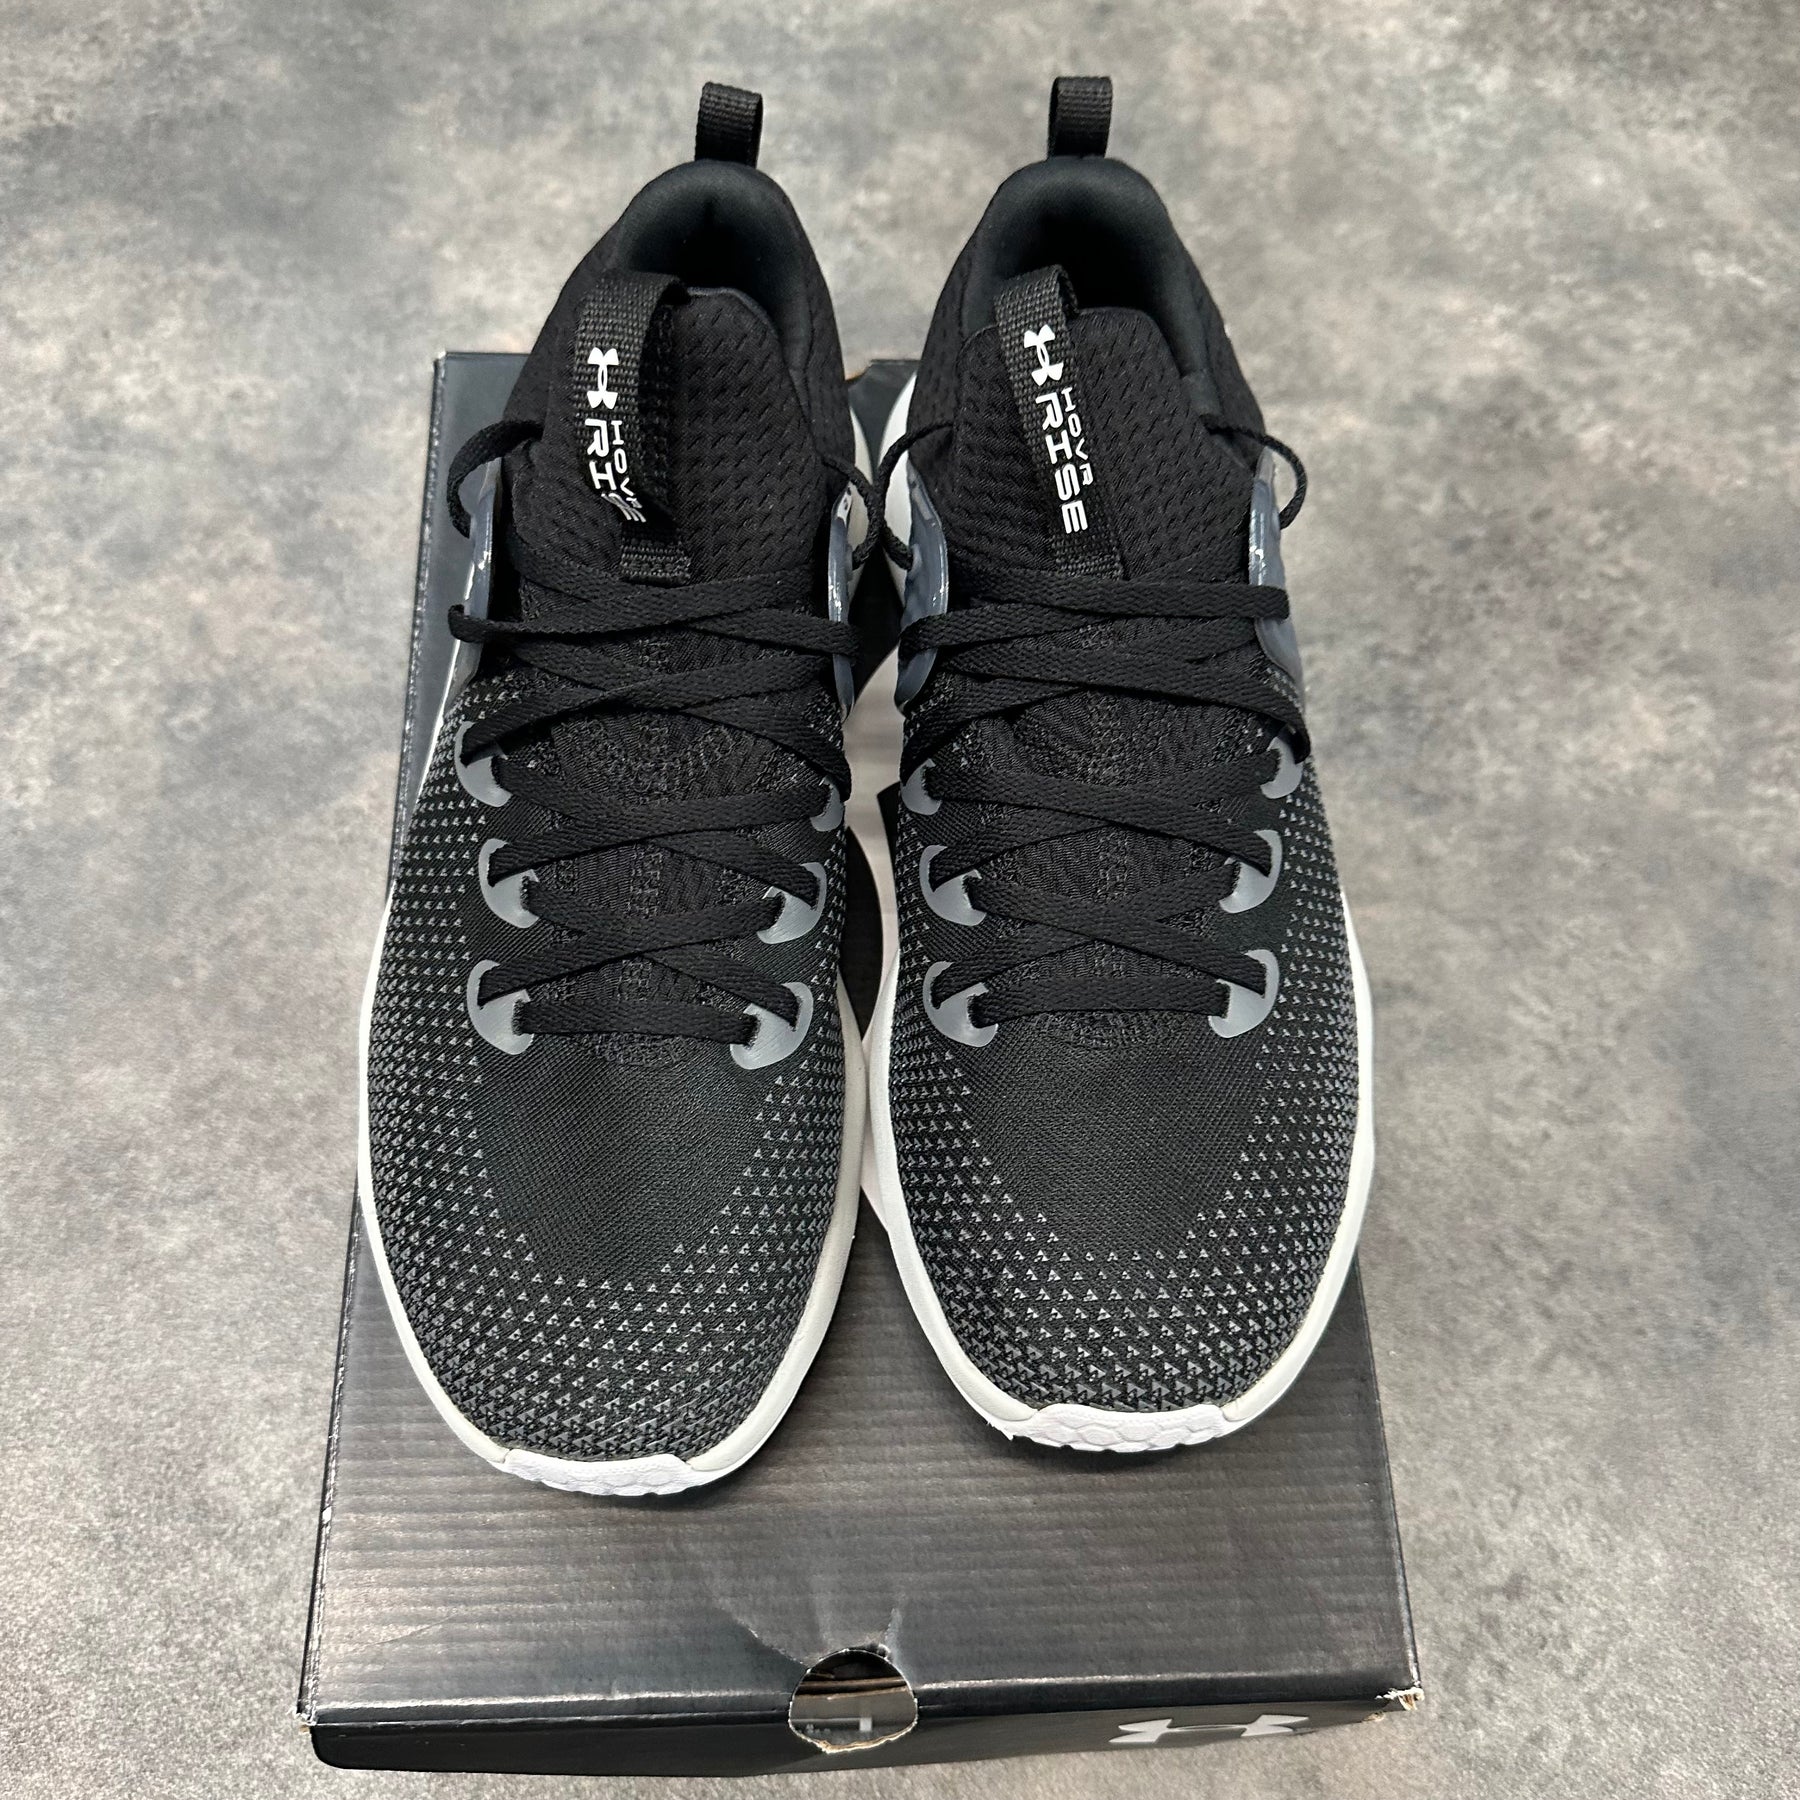 UNDER ARMOUR MENS TECH RUNNING GYM TRAINERS